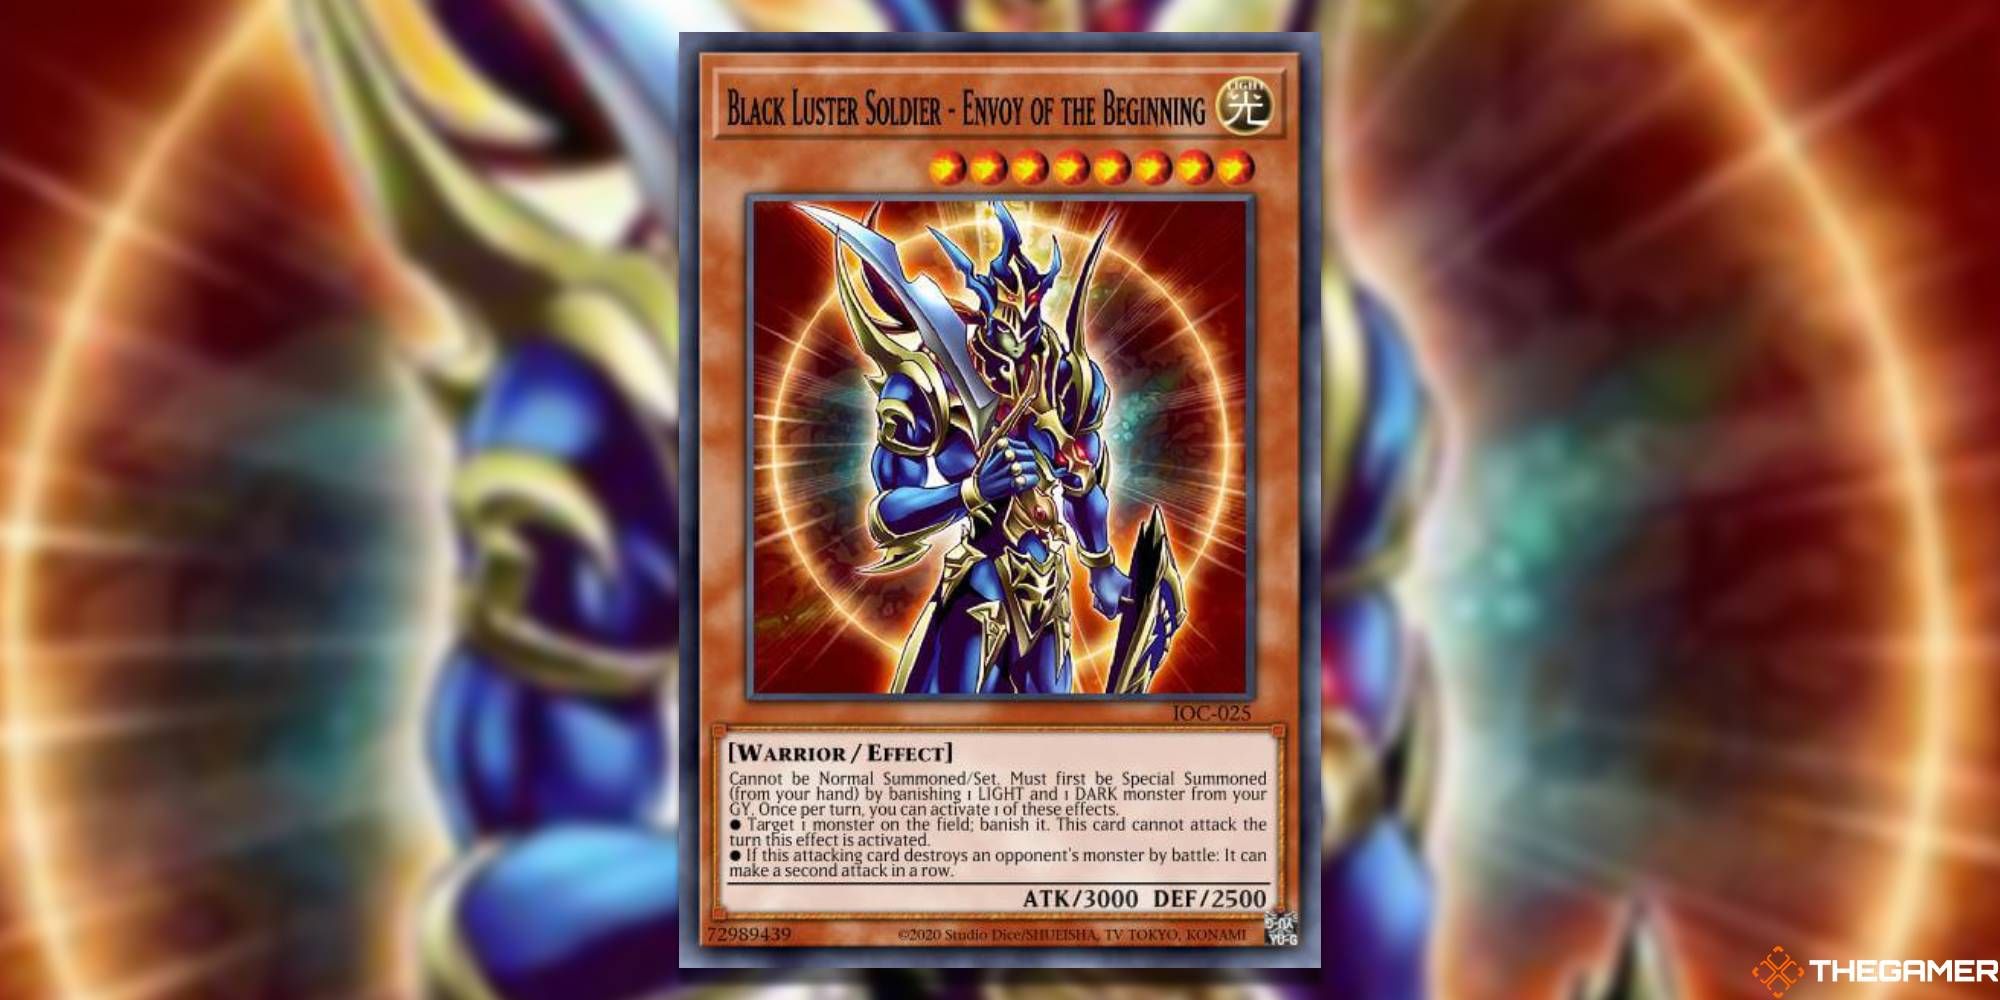 Black Luster Soldier from Yu-Gi-Oh Invasion of Chaos